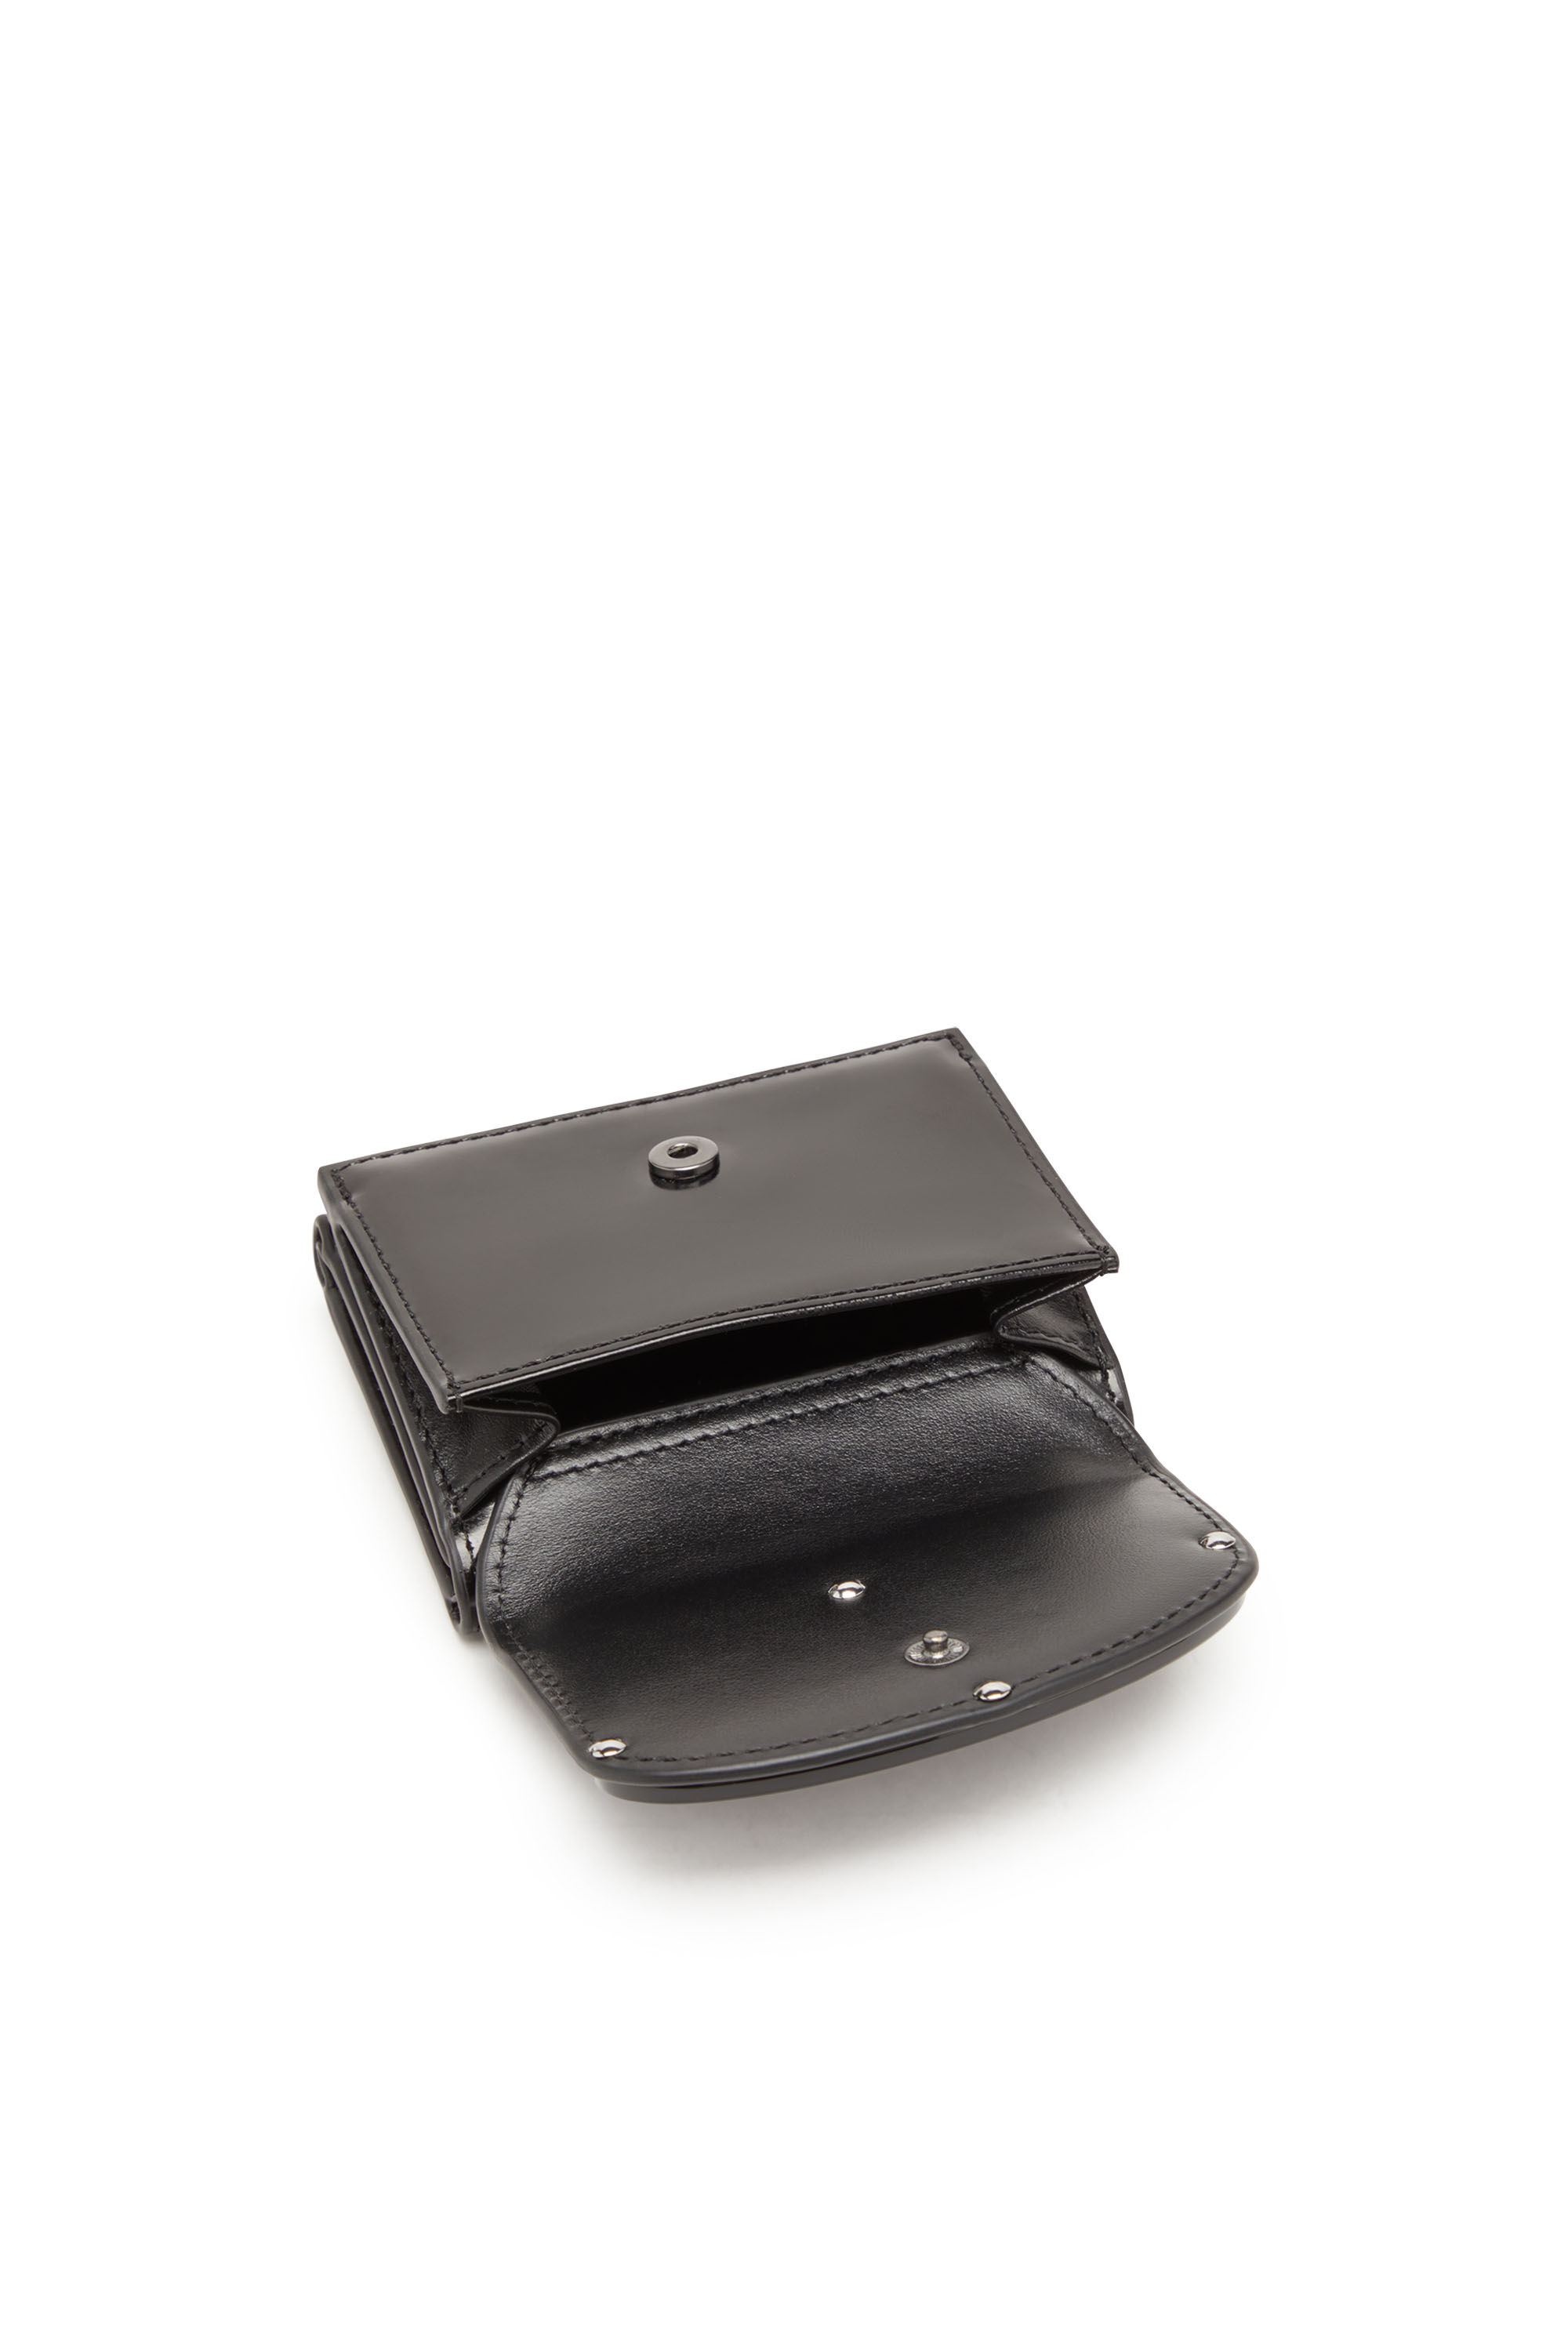 Diesel - 1DR TRI FOLD COIN XS II, Female Tri-fold wallet in mirrored leather in ブラック - Image 4